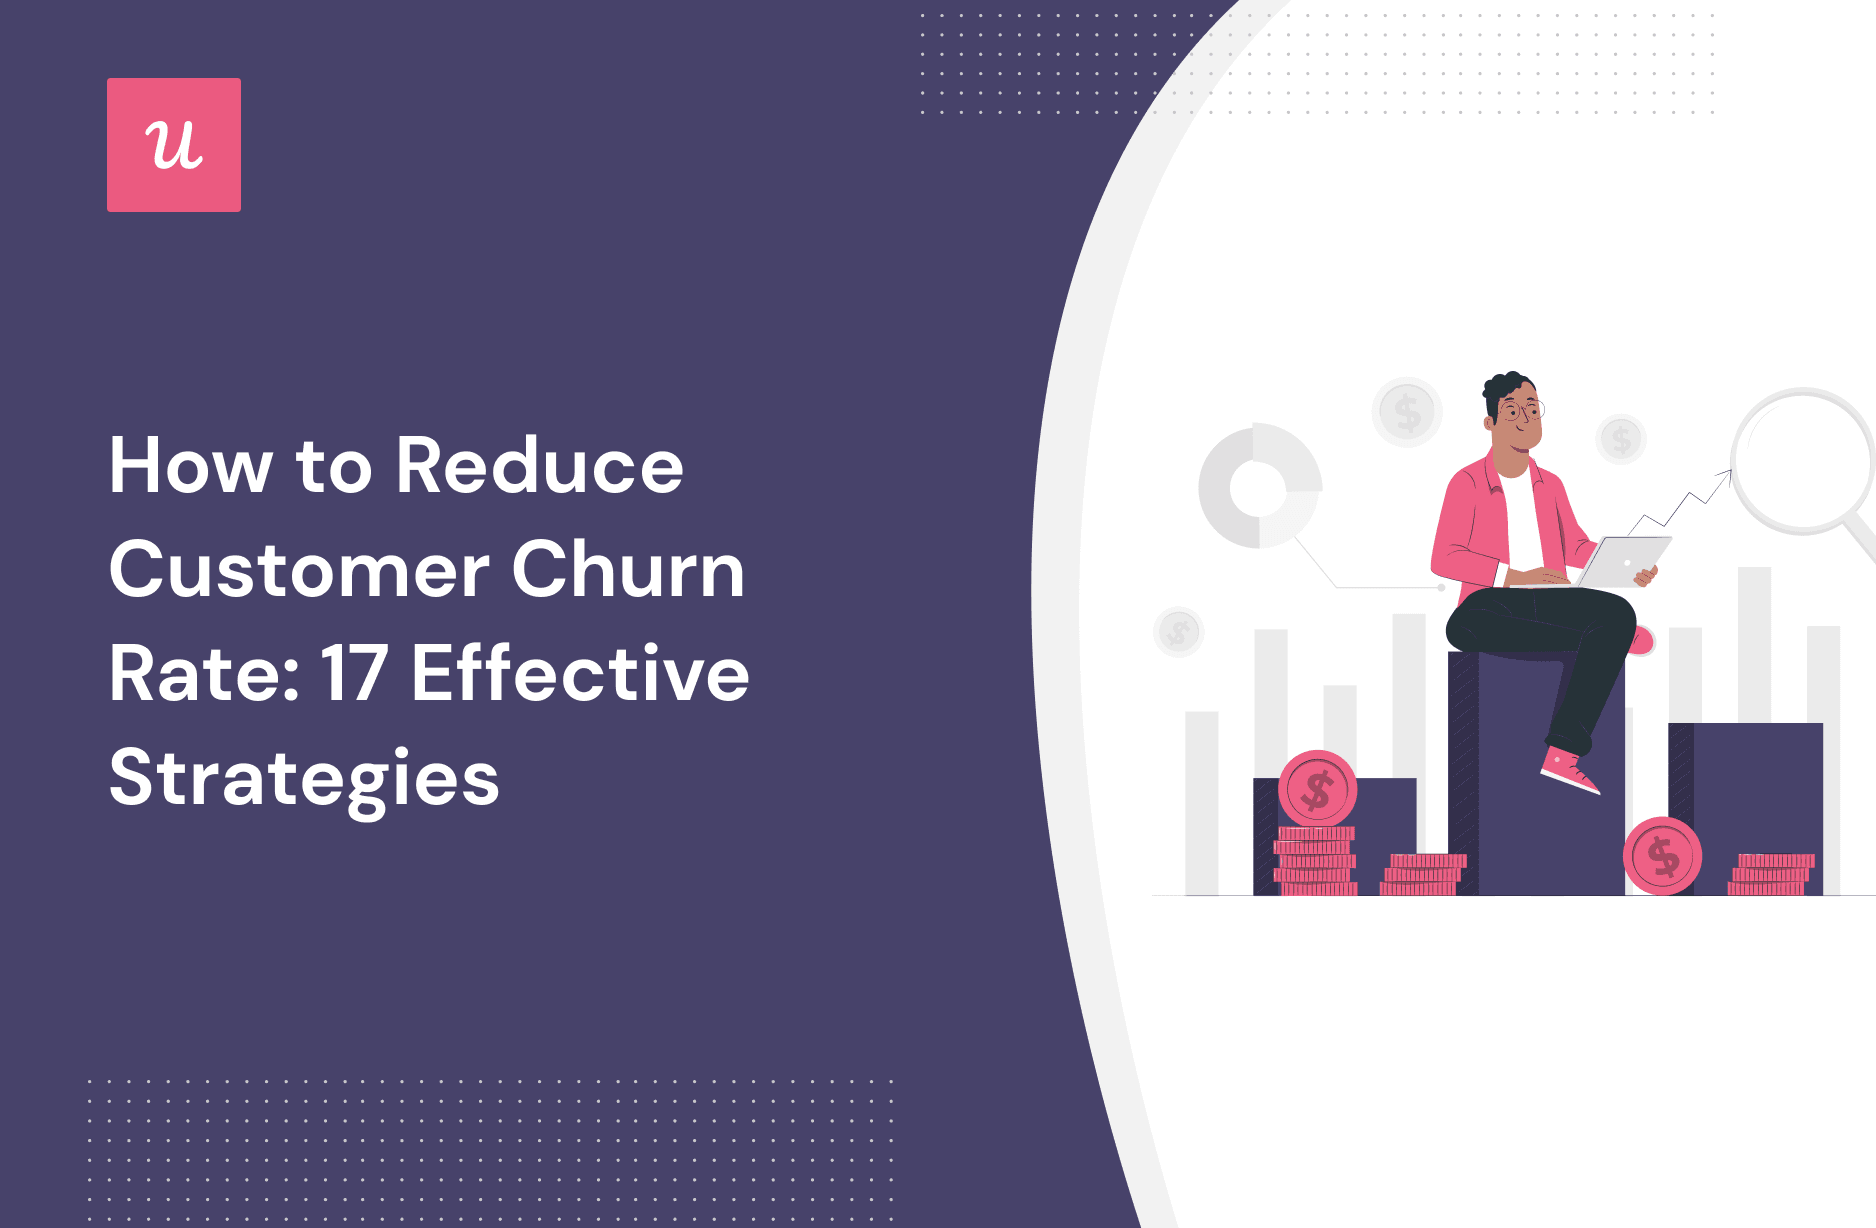 How to Reduce Customer Churn Rate: 17 Effective Strategies cover